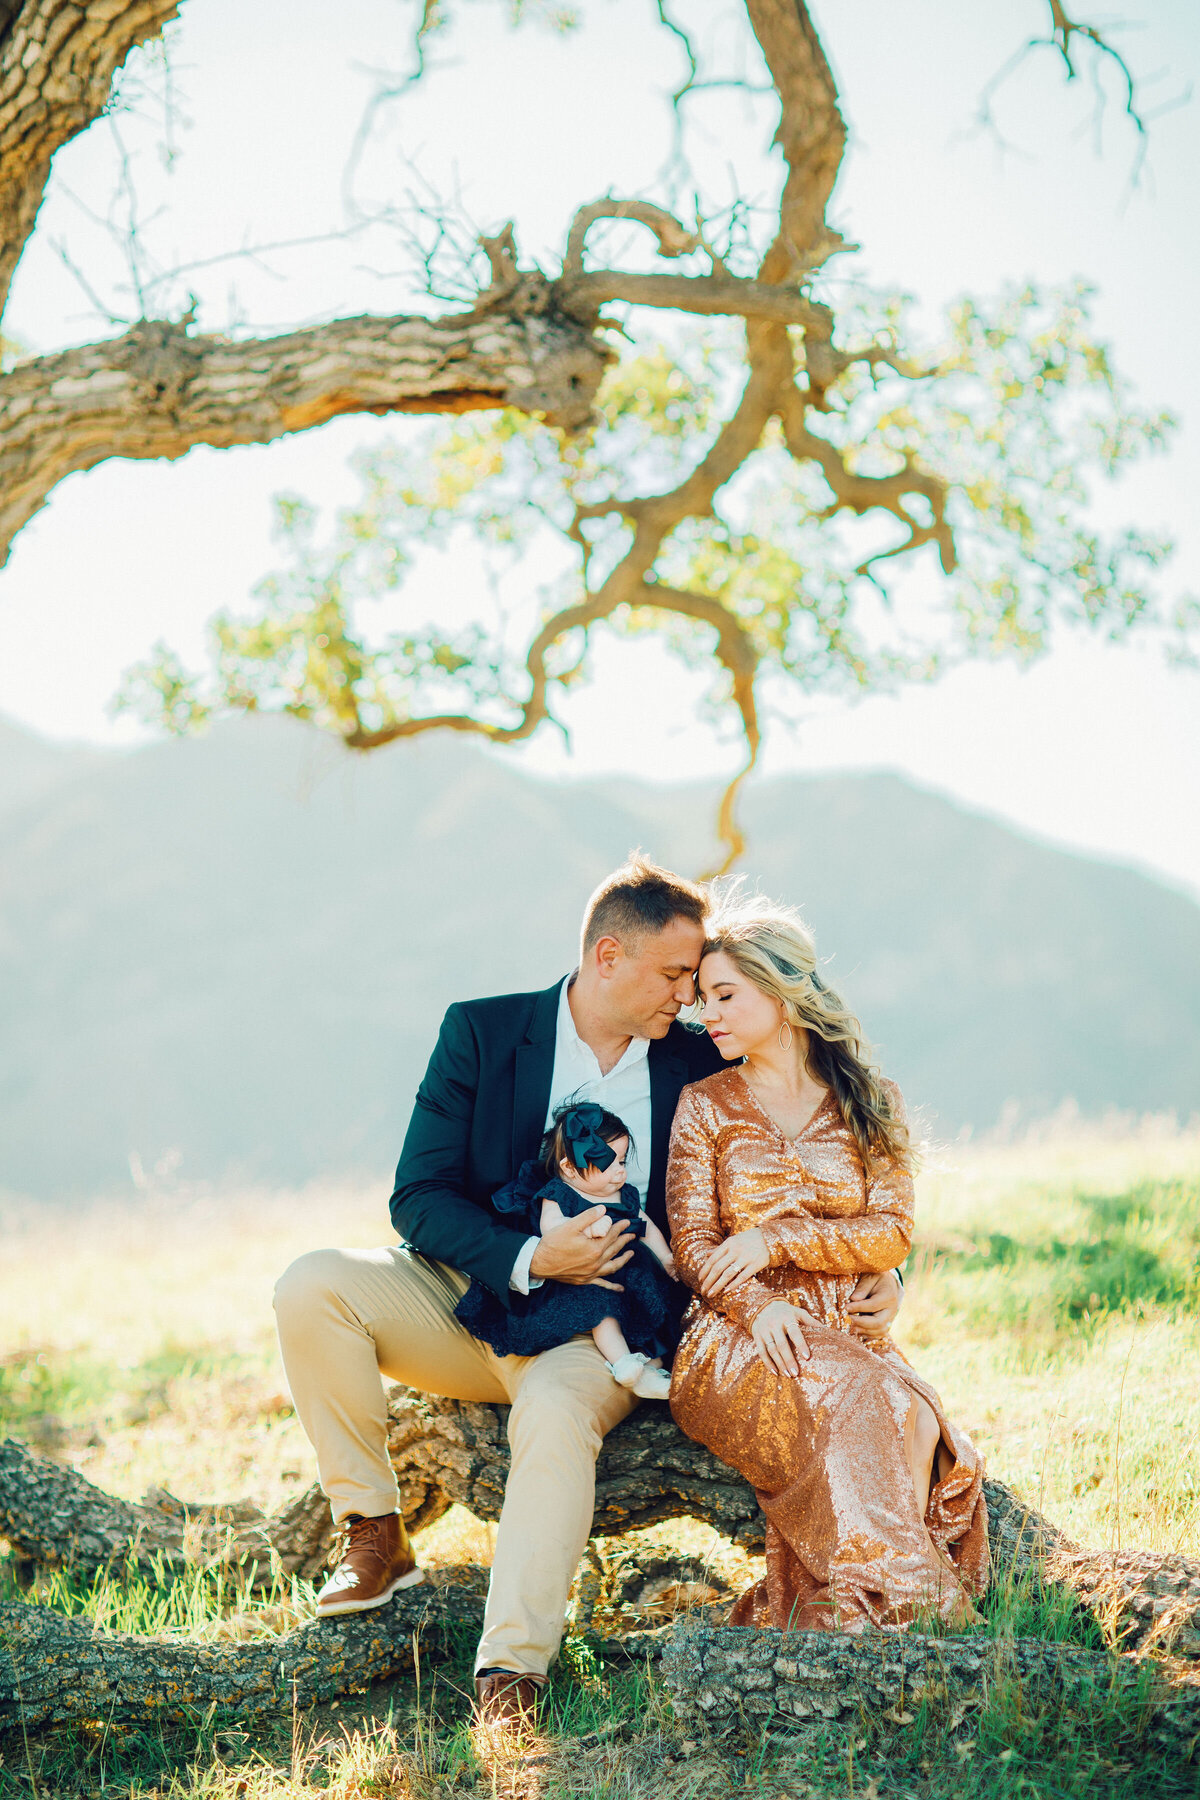 Family Portrait Photo Of Couple Holding Their Baby Under a Tree Los Angeles